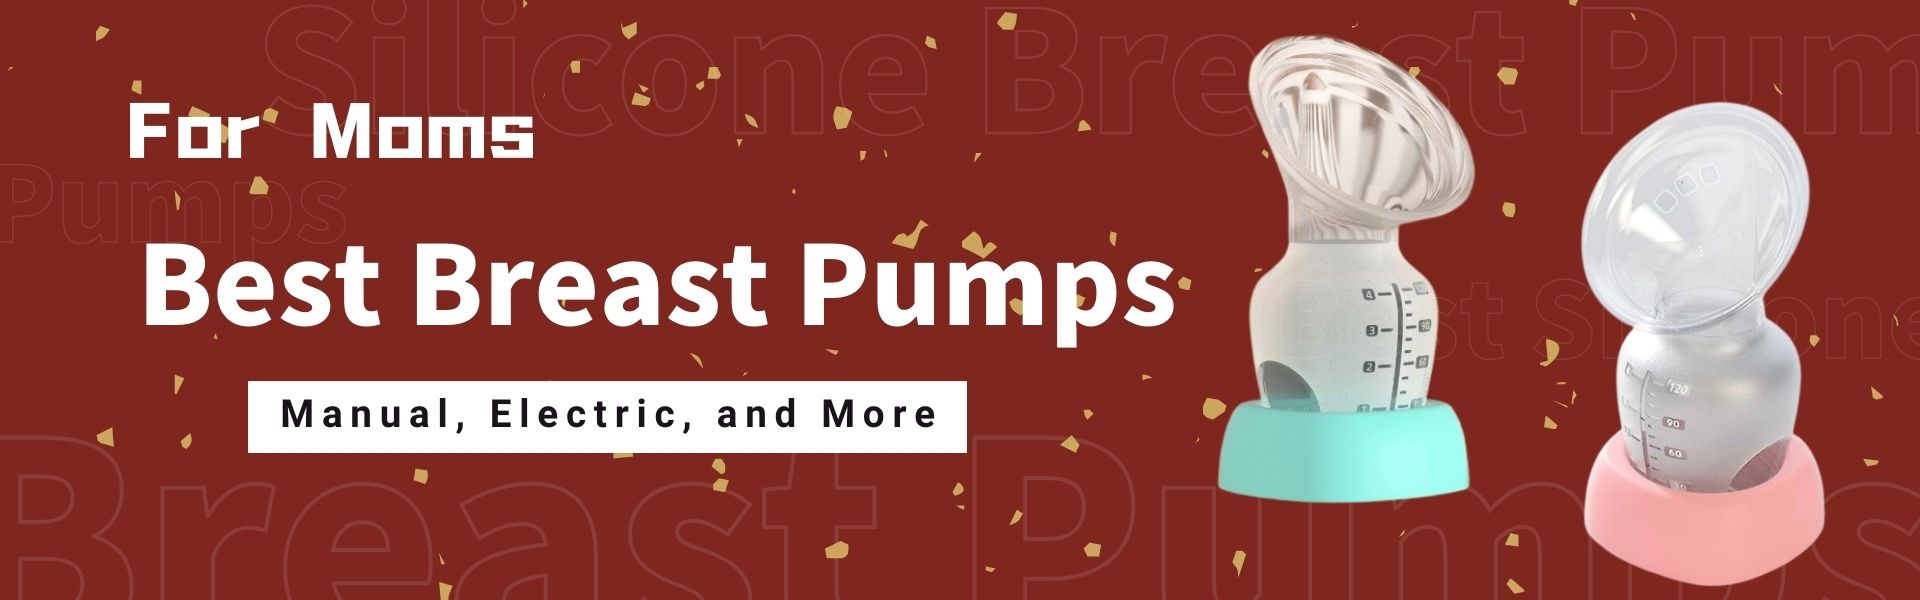 Best Breast Pumps for Moms 2022 - Manual, Electric, and More